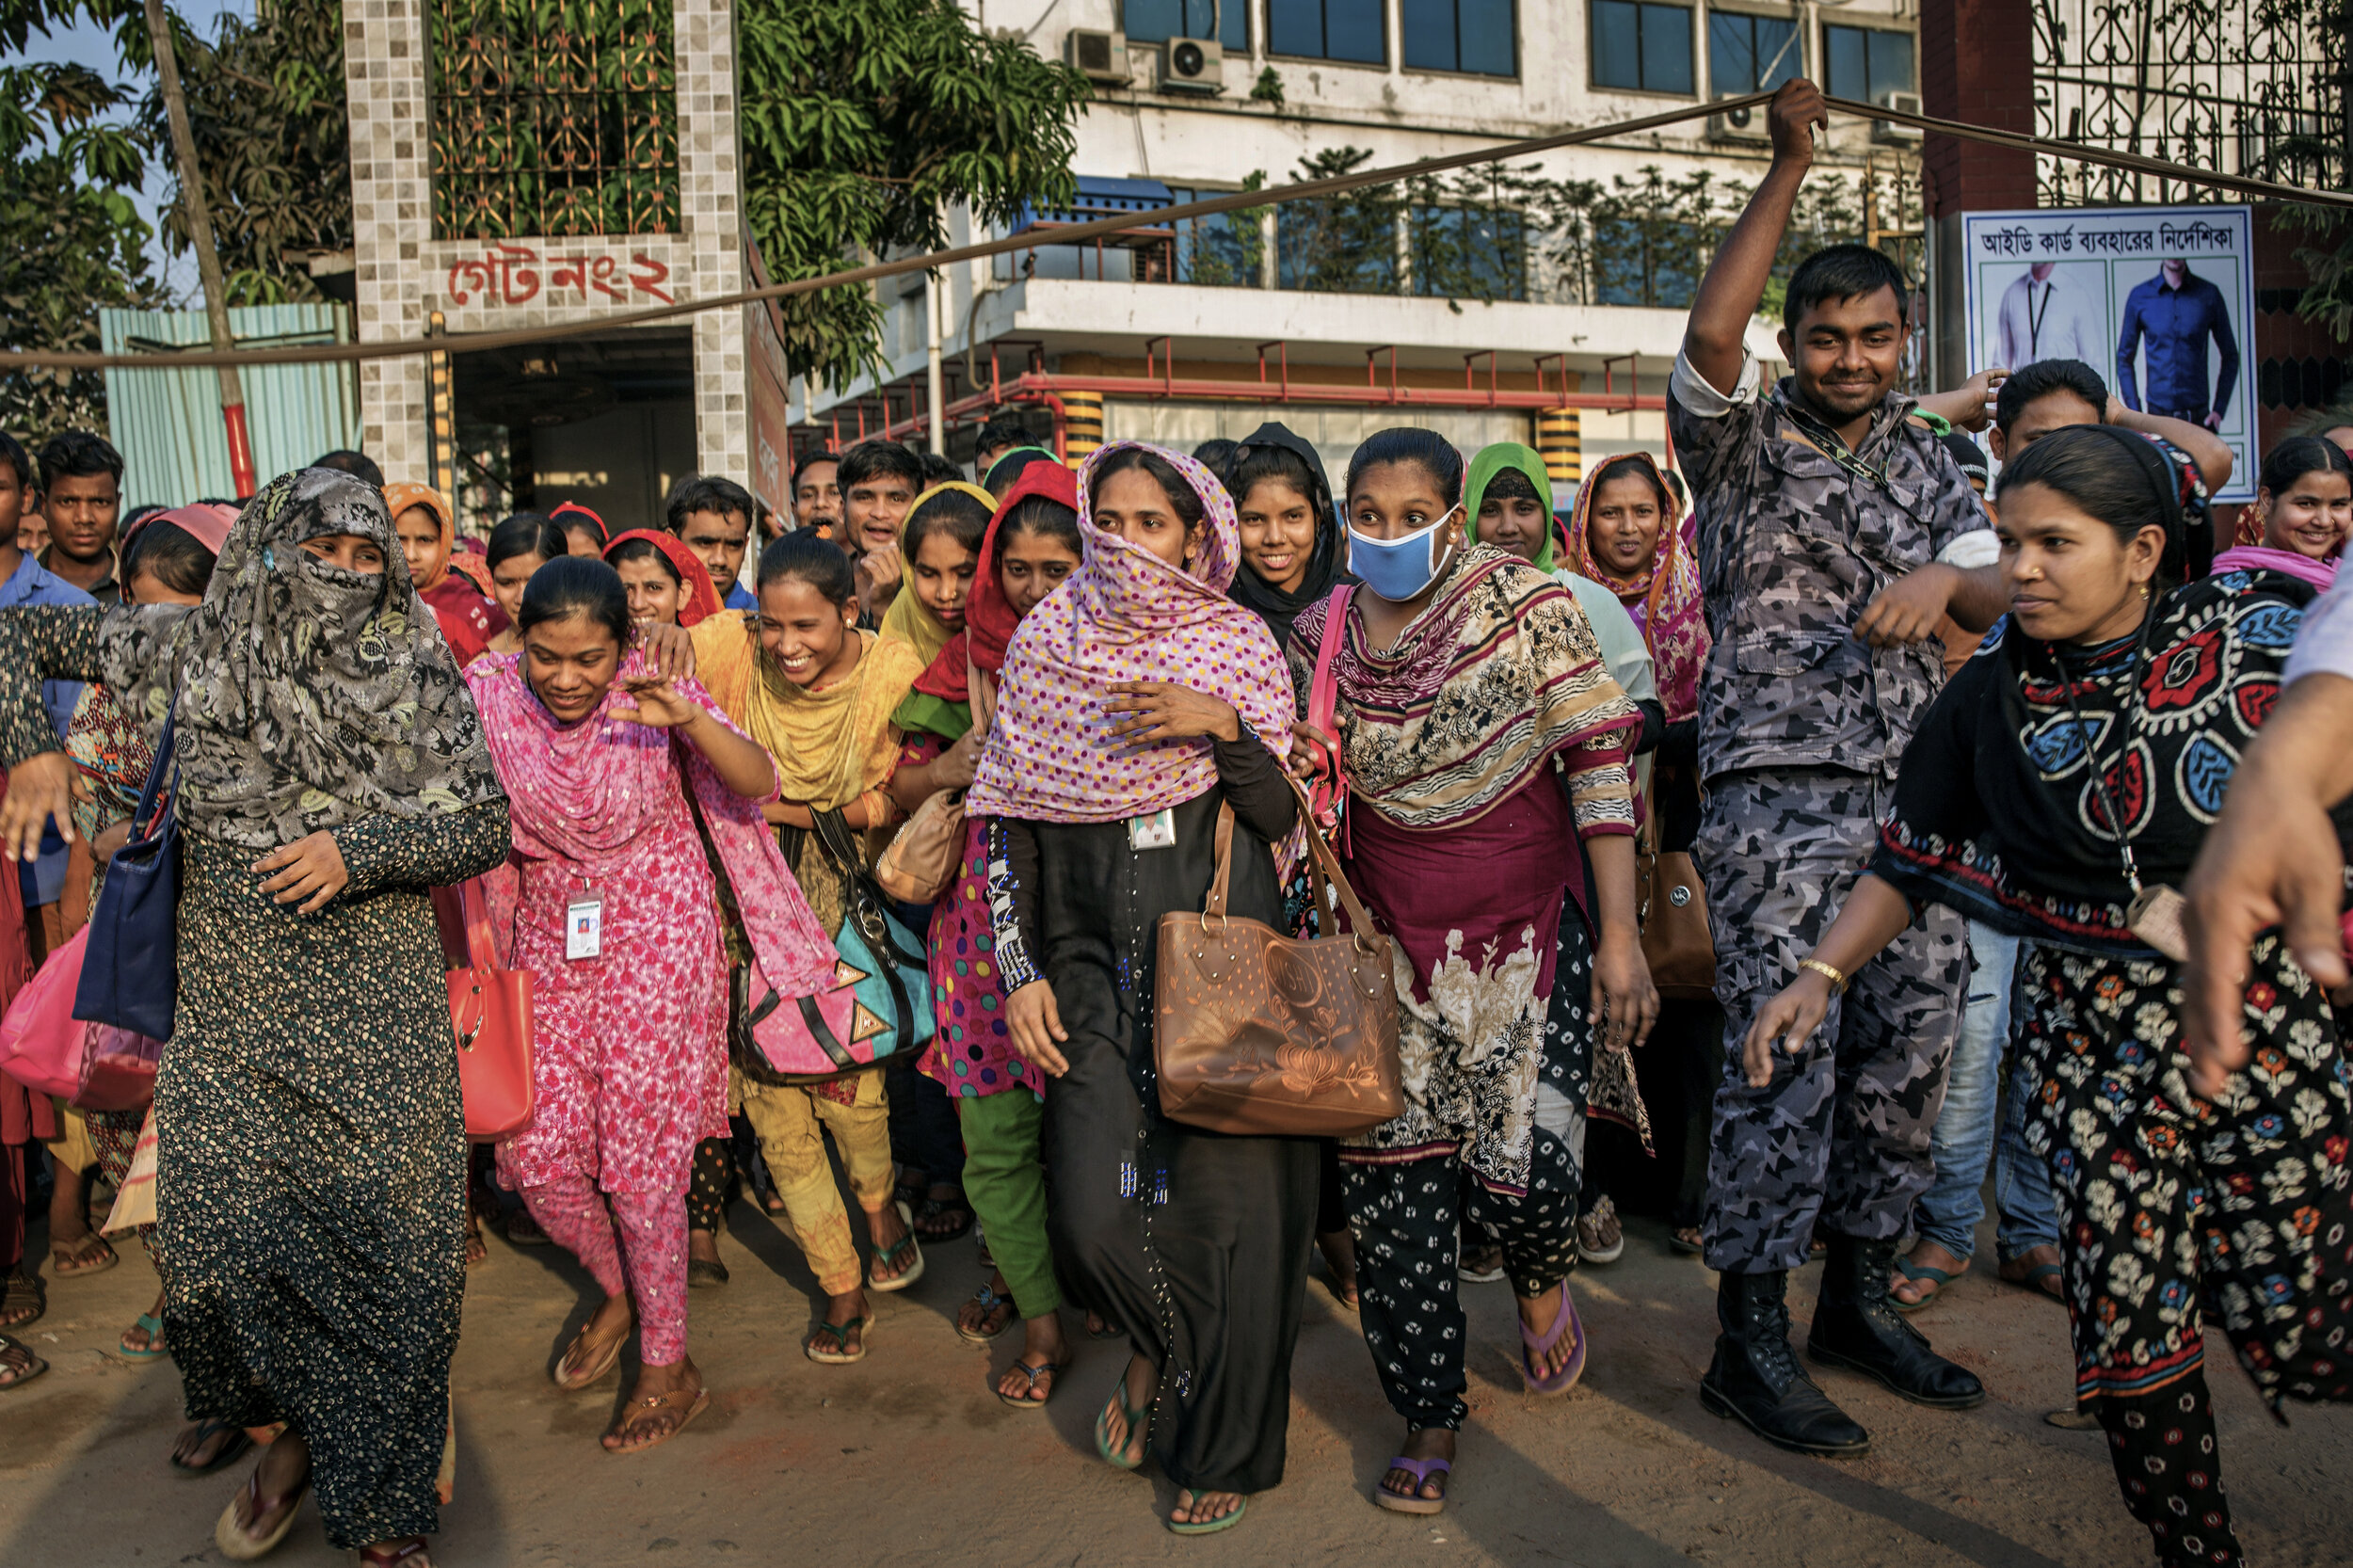  Female workers rush out from a sweatshop at the end of the working day, Dhaka / Bangladesh 2017. 